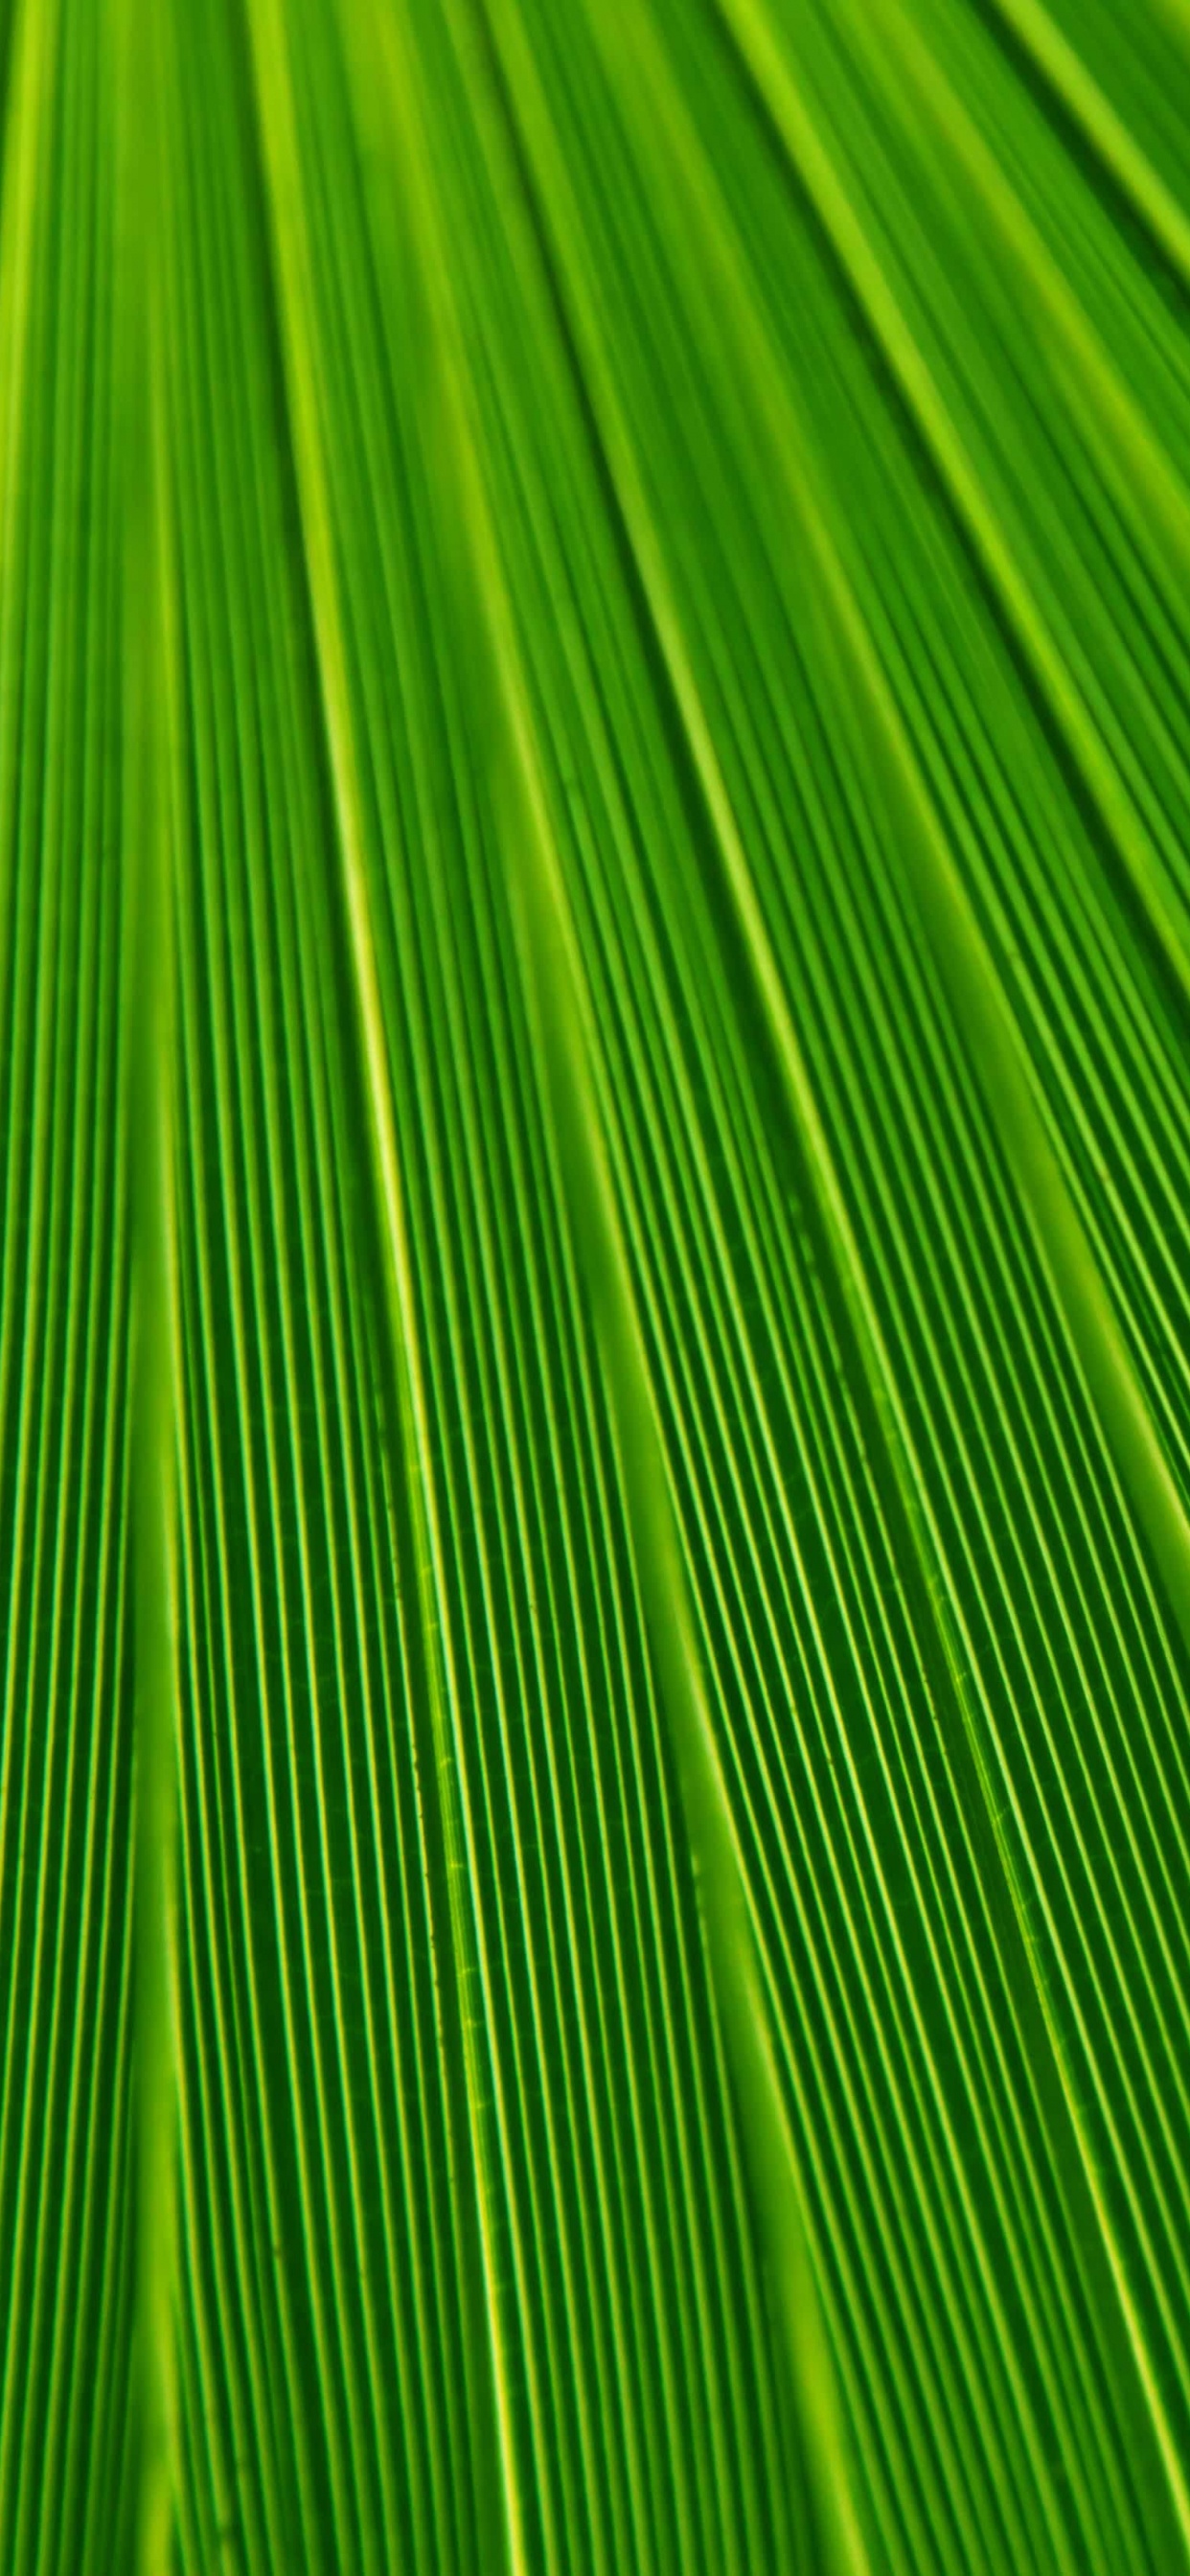 Green and Yellow Striped Textile. Wallpaper in 1242x2688 Resolution